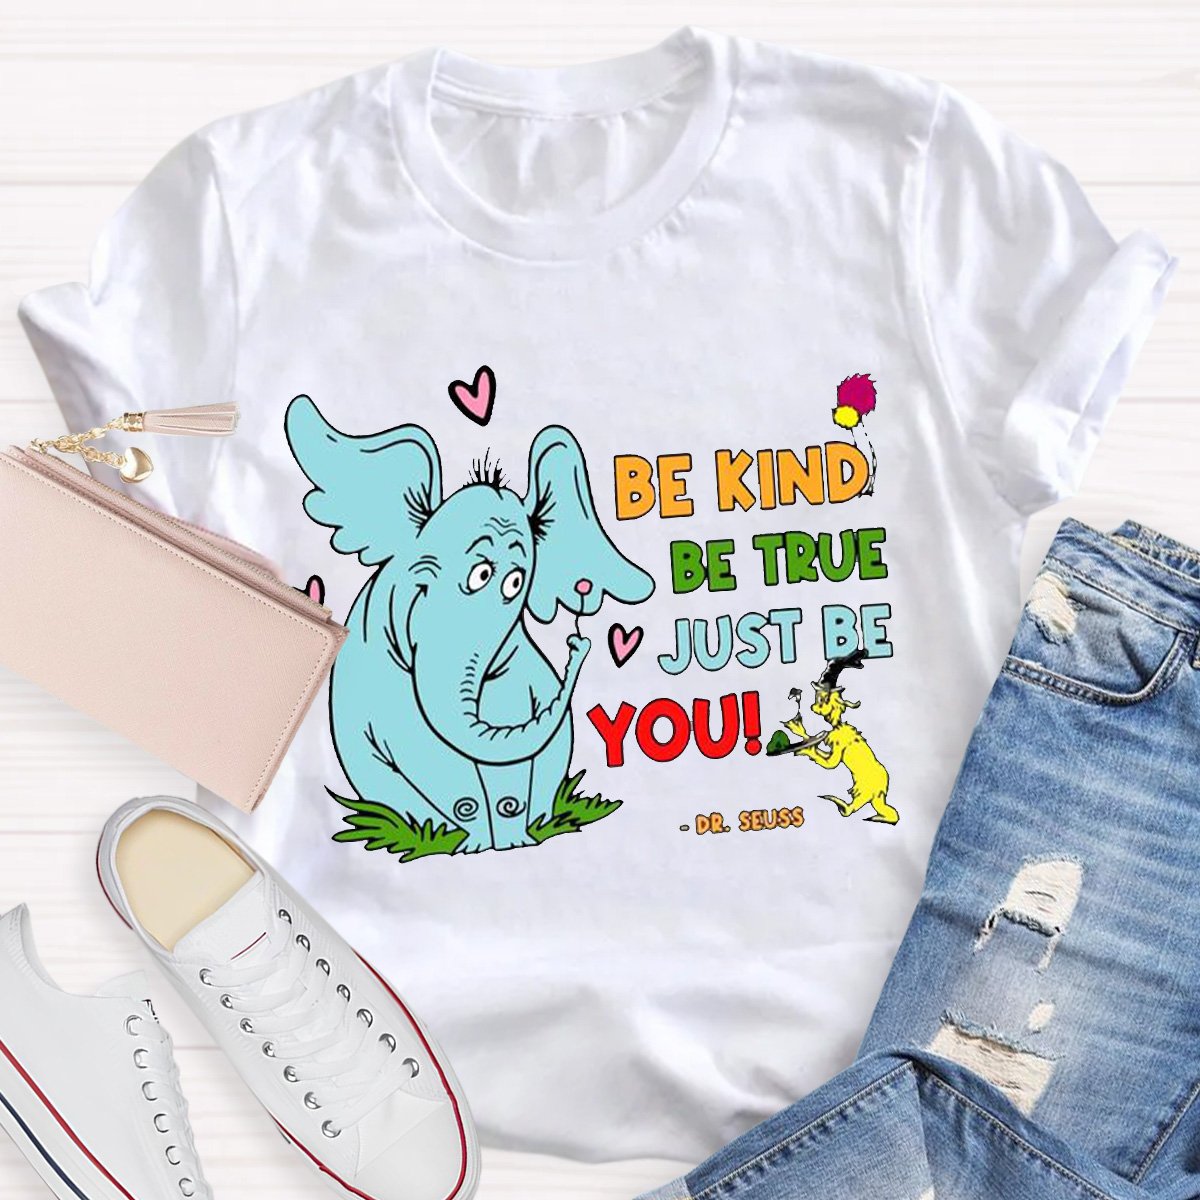 Personalized Be Kind Be True Just Be You Teacher Shirt